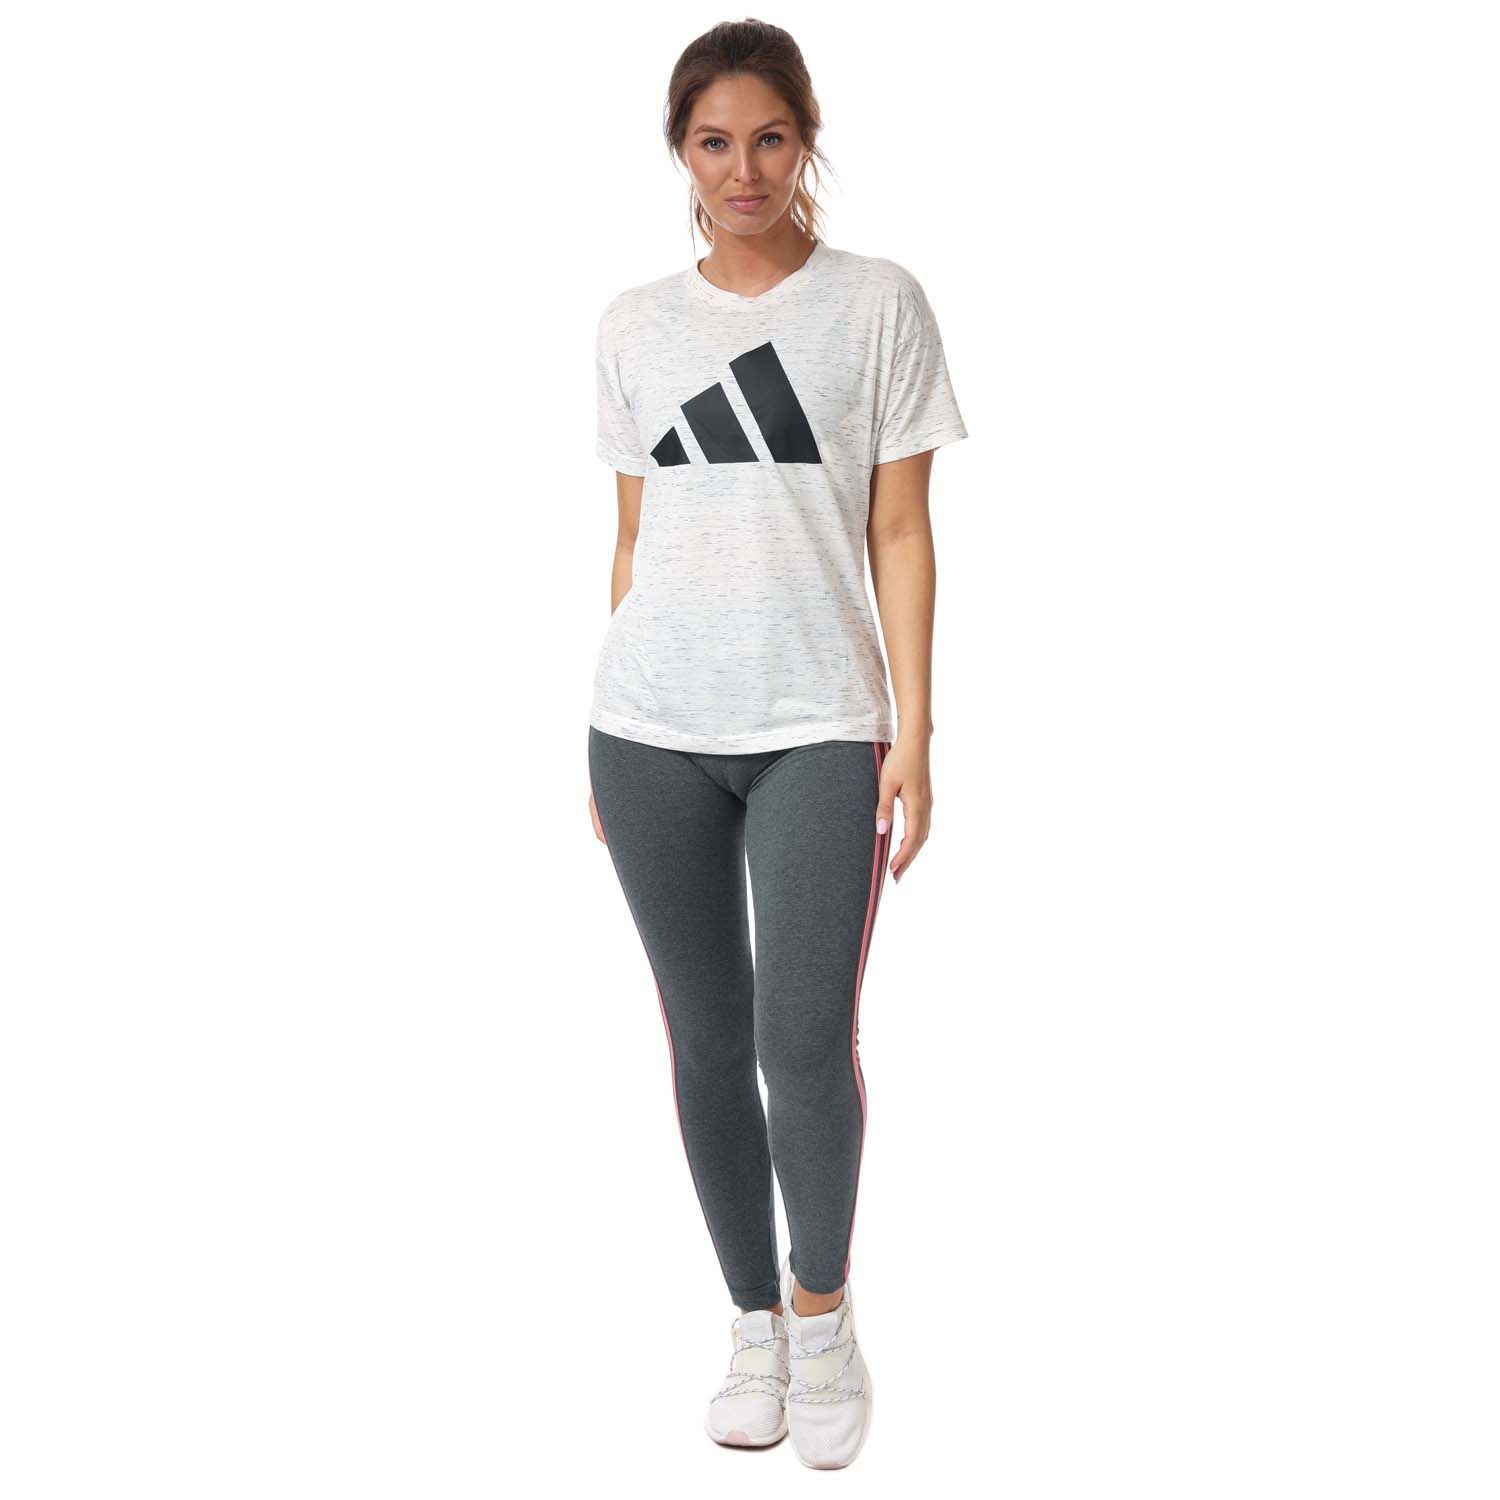 Womens adidas Sport Inspired Winners 2.0 T-Shirt in white melange.- Crew neckline.- Short sleeve.- Textured feel.- Long length.- Loose fit.- Main Material: 50% Polyester (Recycled)  25% Cotton  25% Rayon.- Ref: GP9639